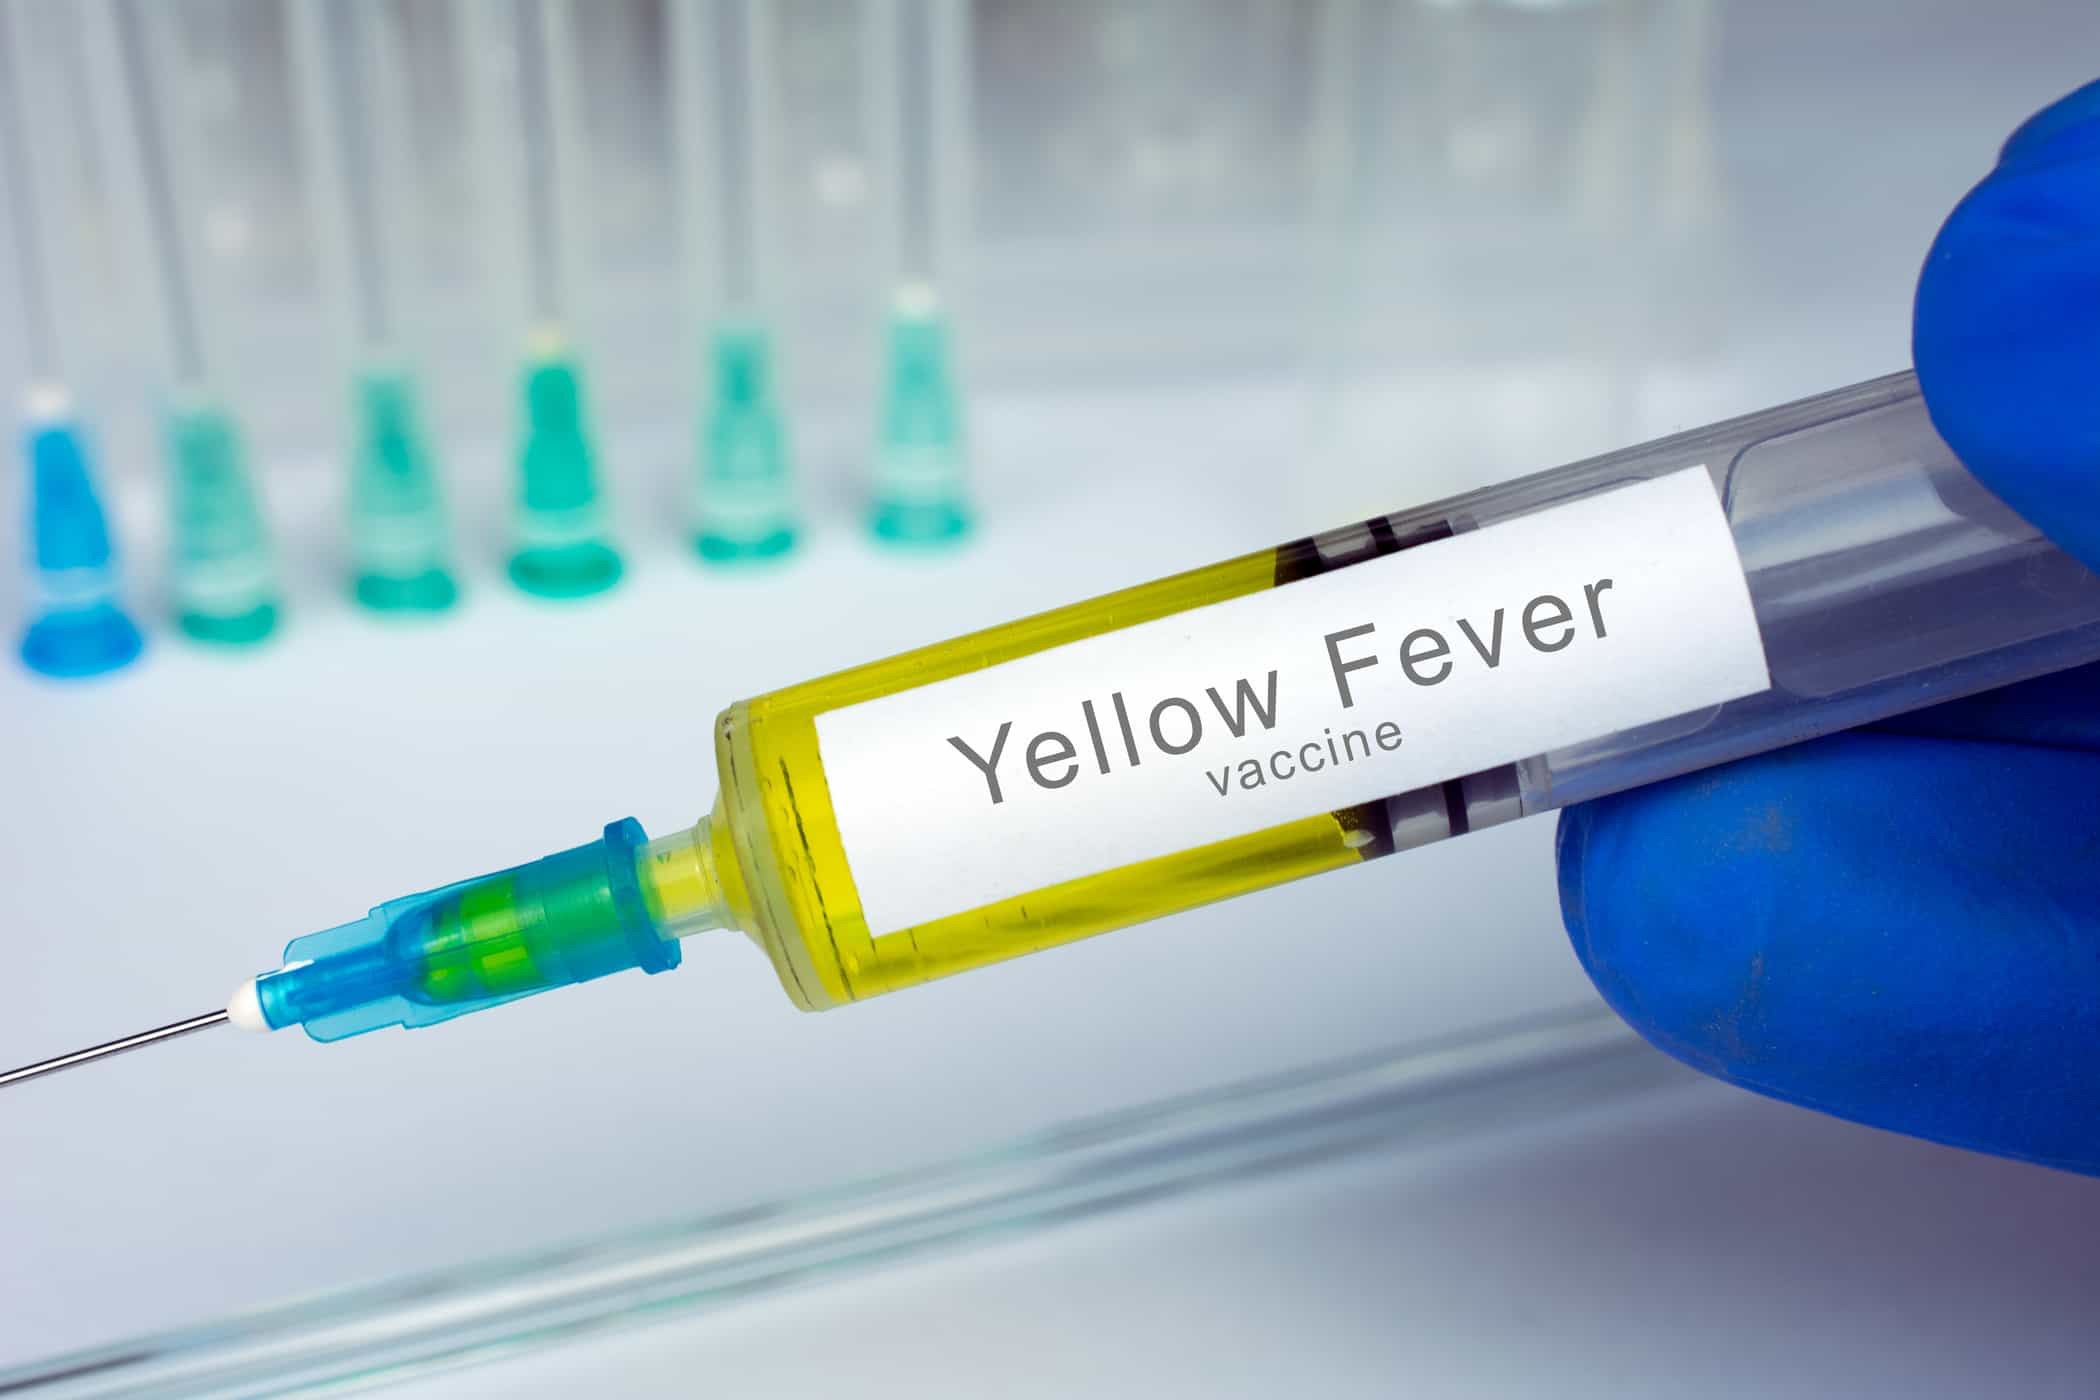 MoH set for mass yellow fever vaccination drive in WES